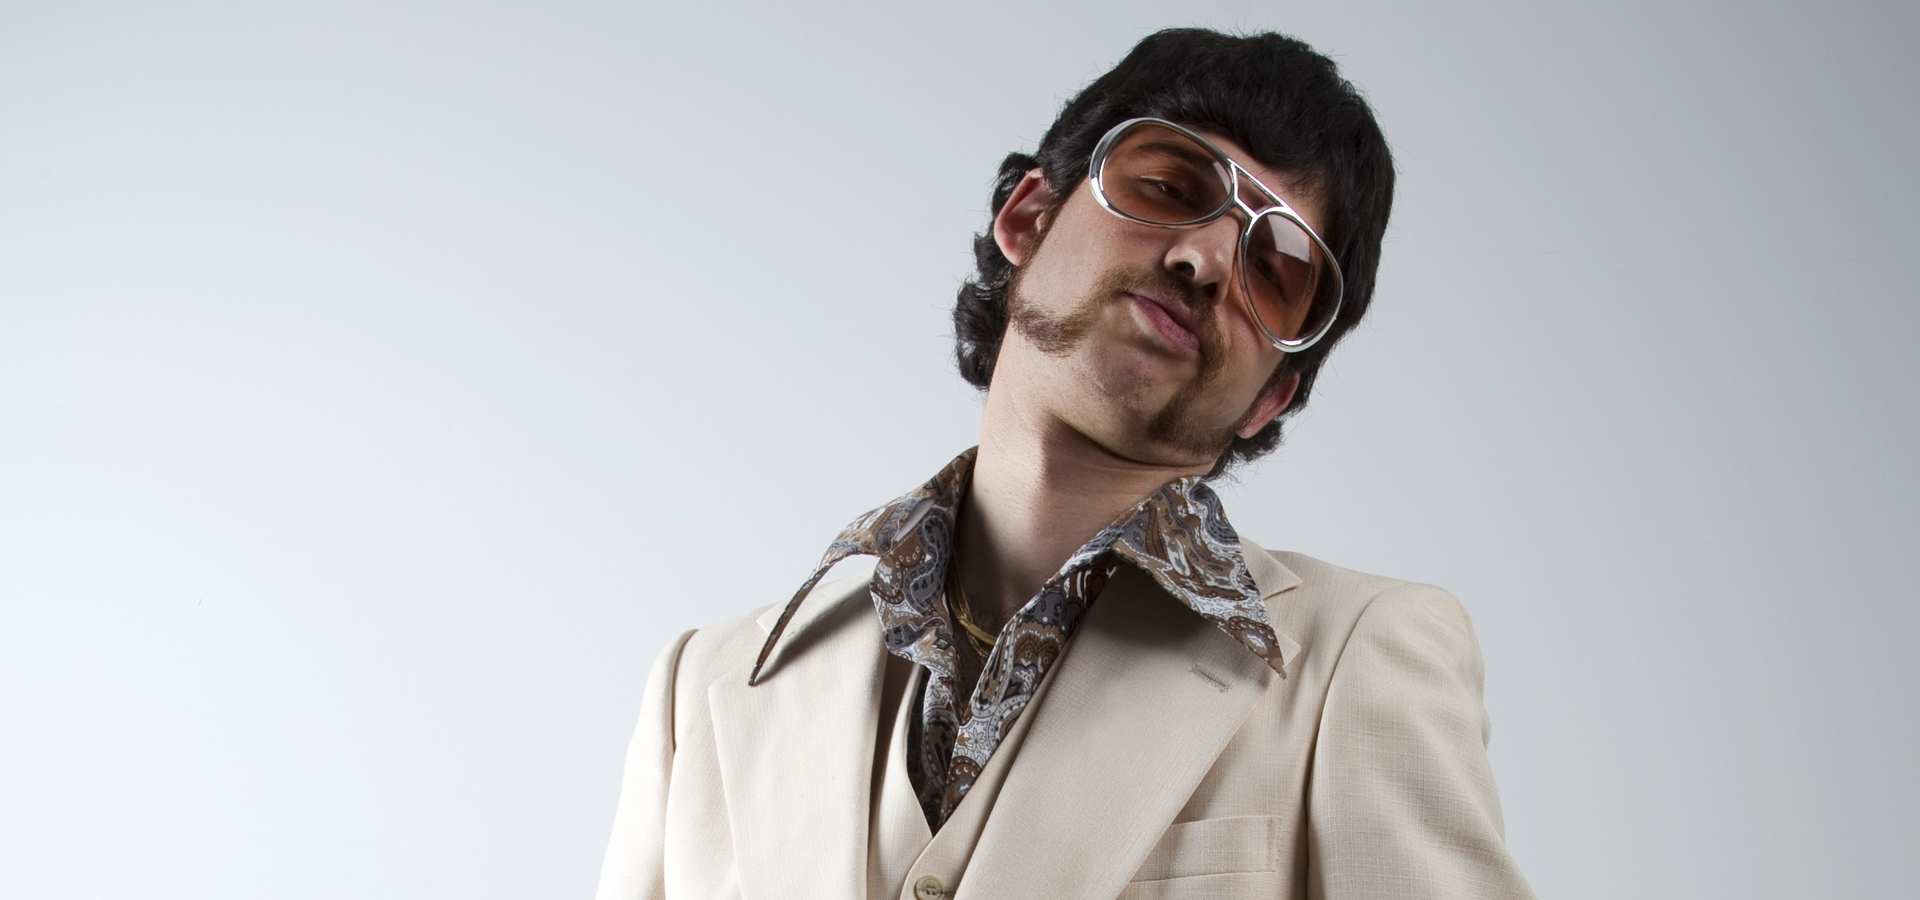 Man with 70's suit, shirt and sunglasses with handlebar mustache